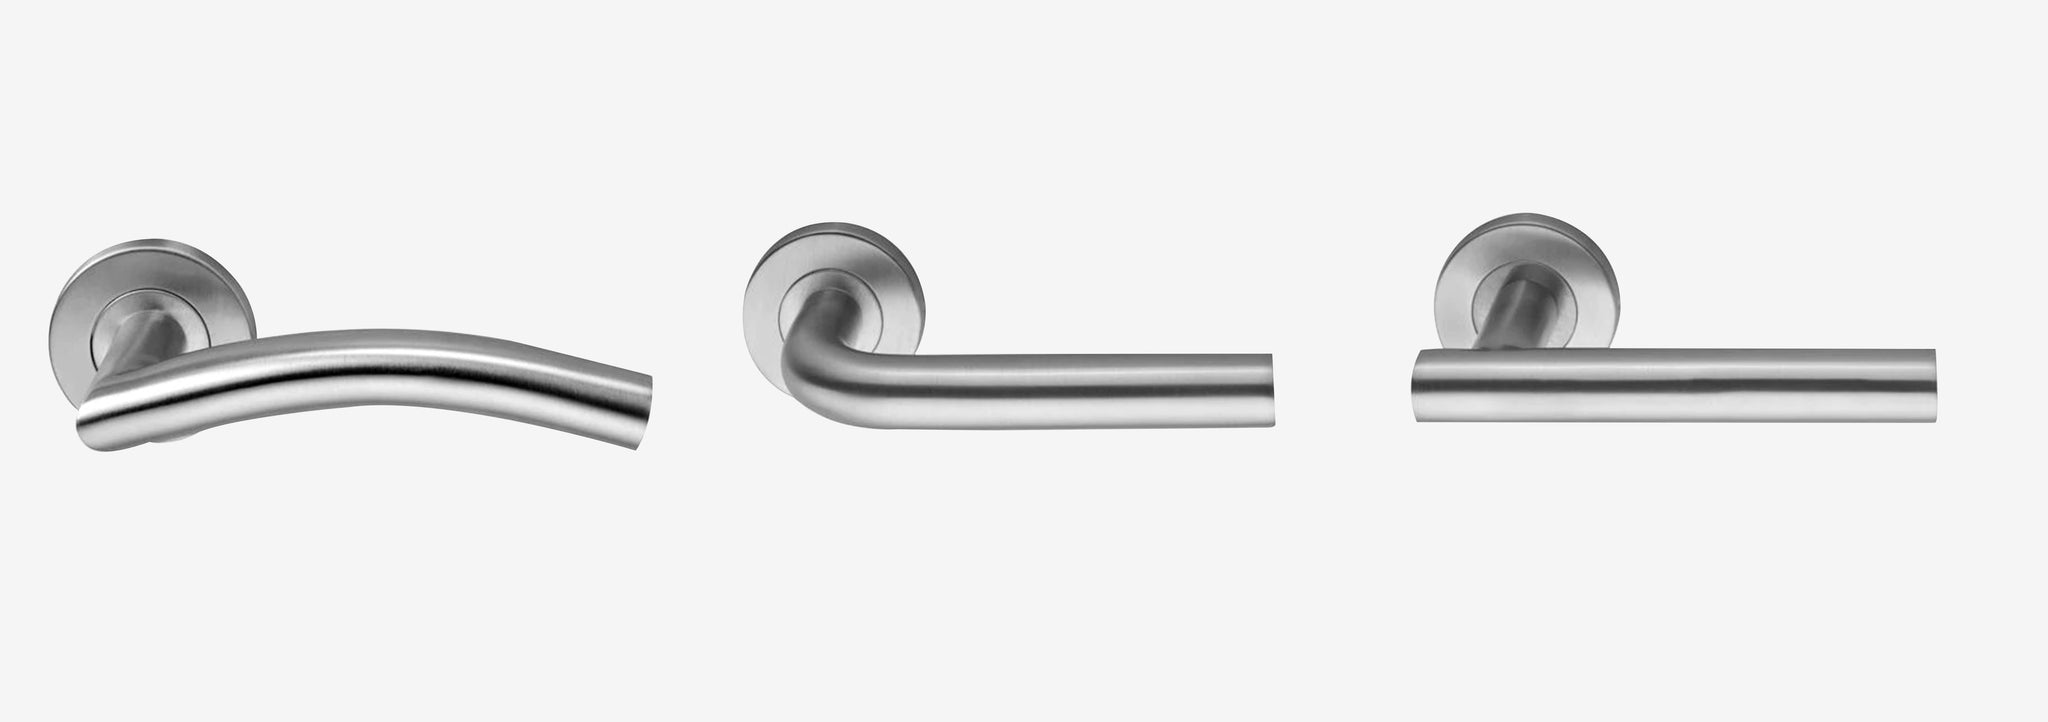 dormakaba - Handles and pulls for glass door systems